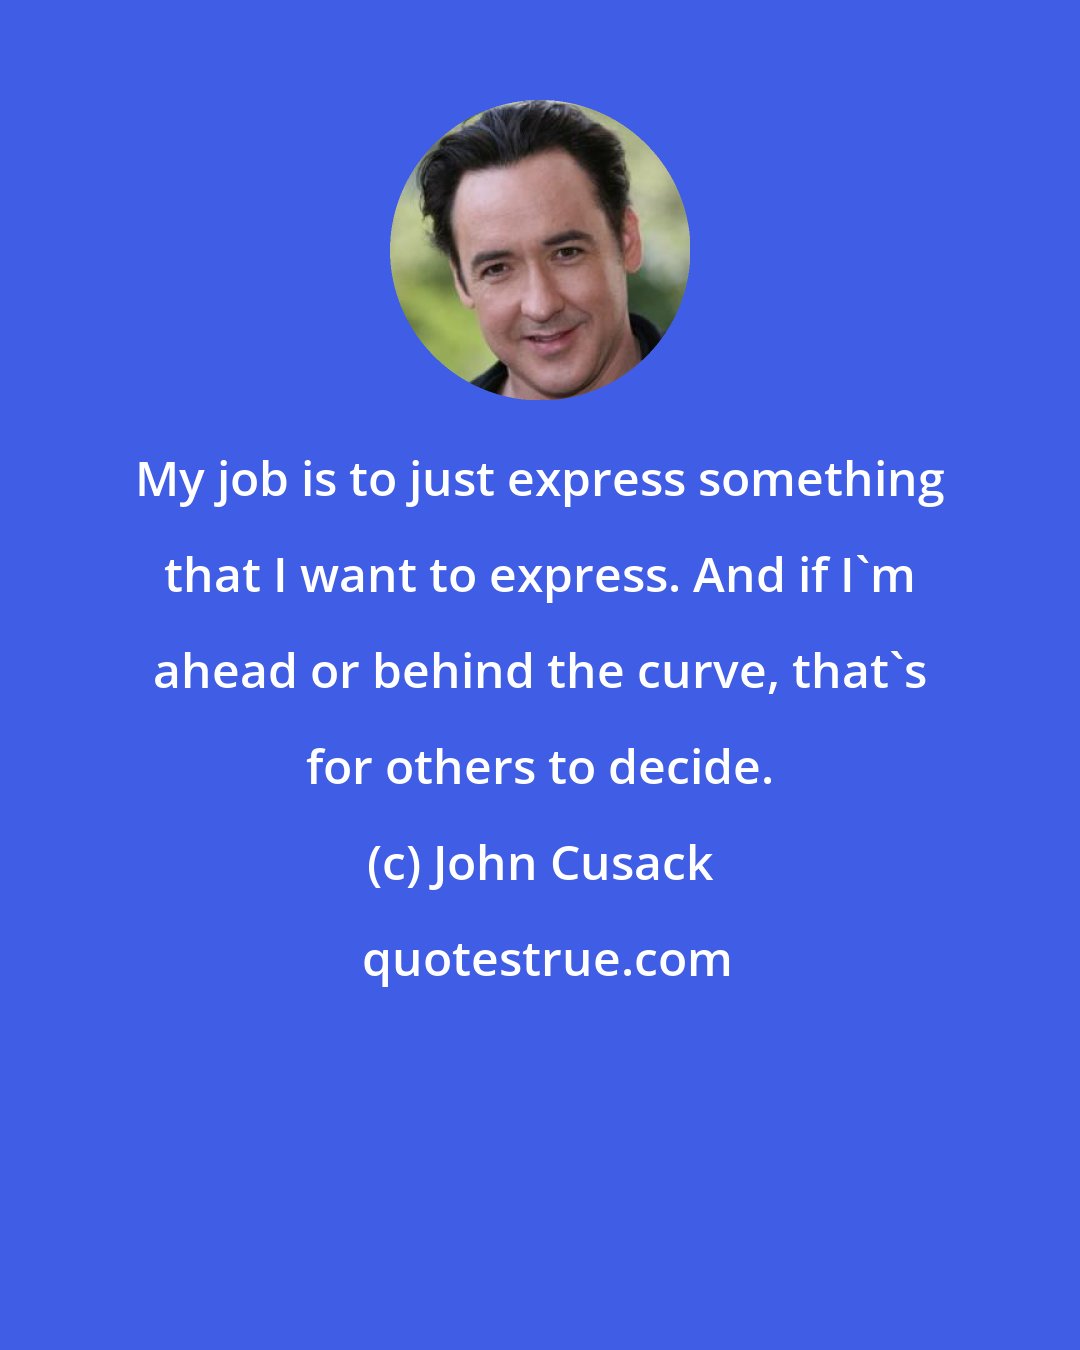 John Cusack: My job is to just express something that I want to express. And if I'm ahead or behind the curve, that's for others to decide.